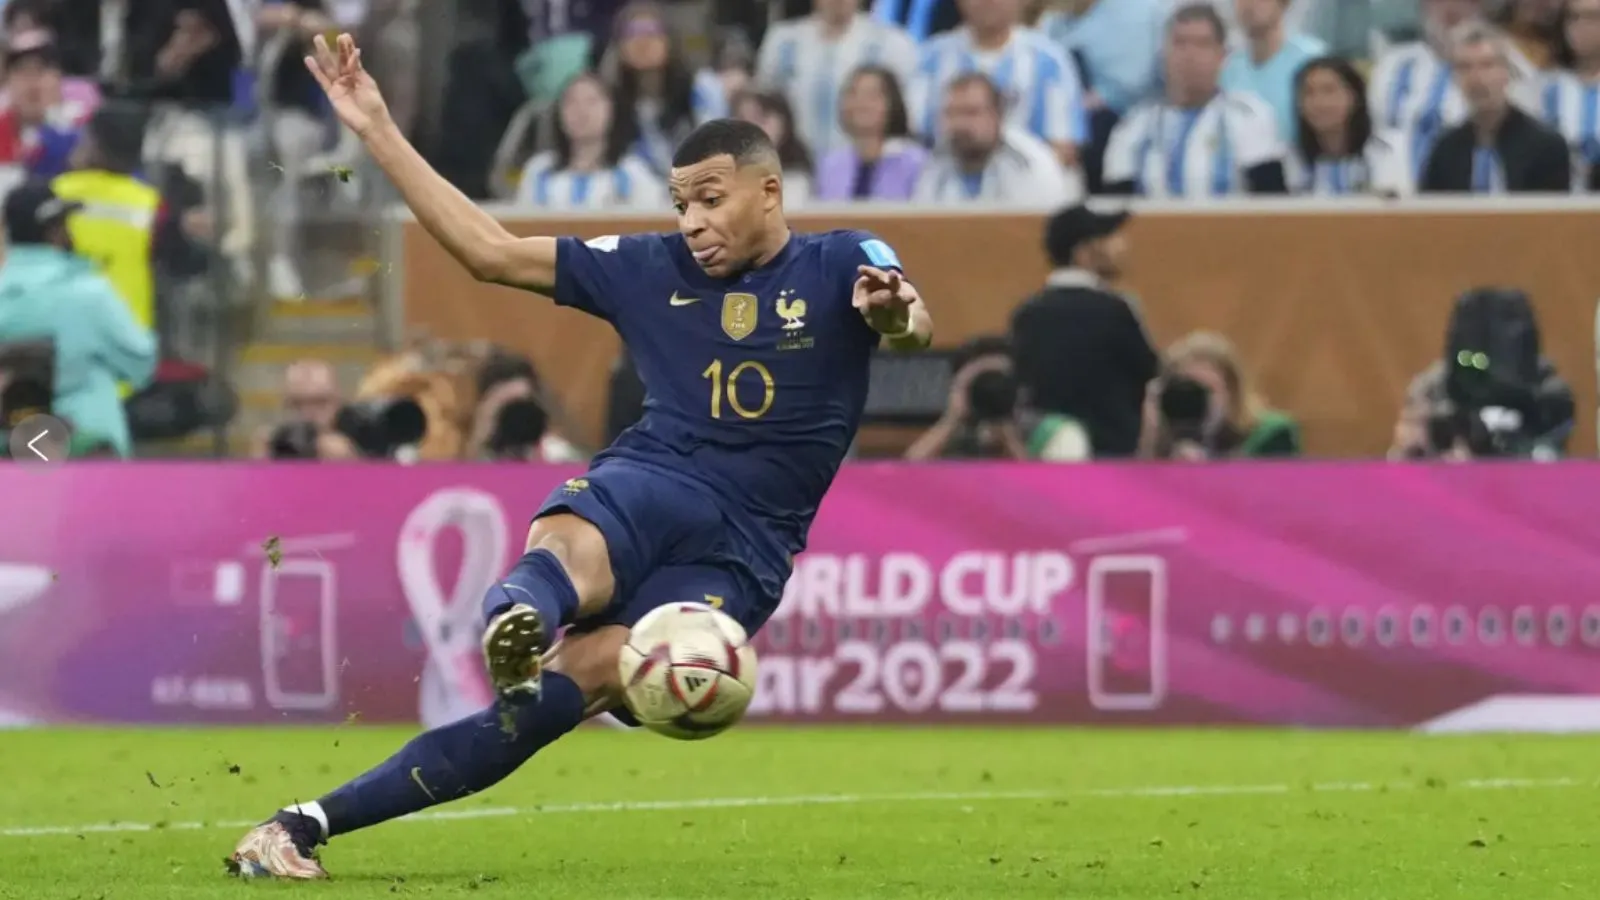 2022 FIFA WC final rewind: Meant for greatness, Mbappe touches it in front  of Messi on a frenzied night in Doha